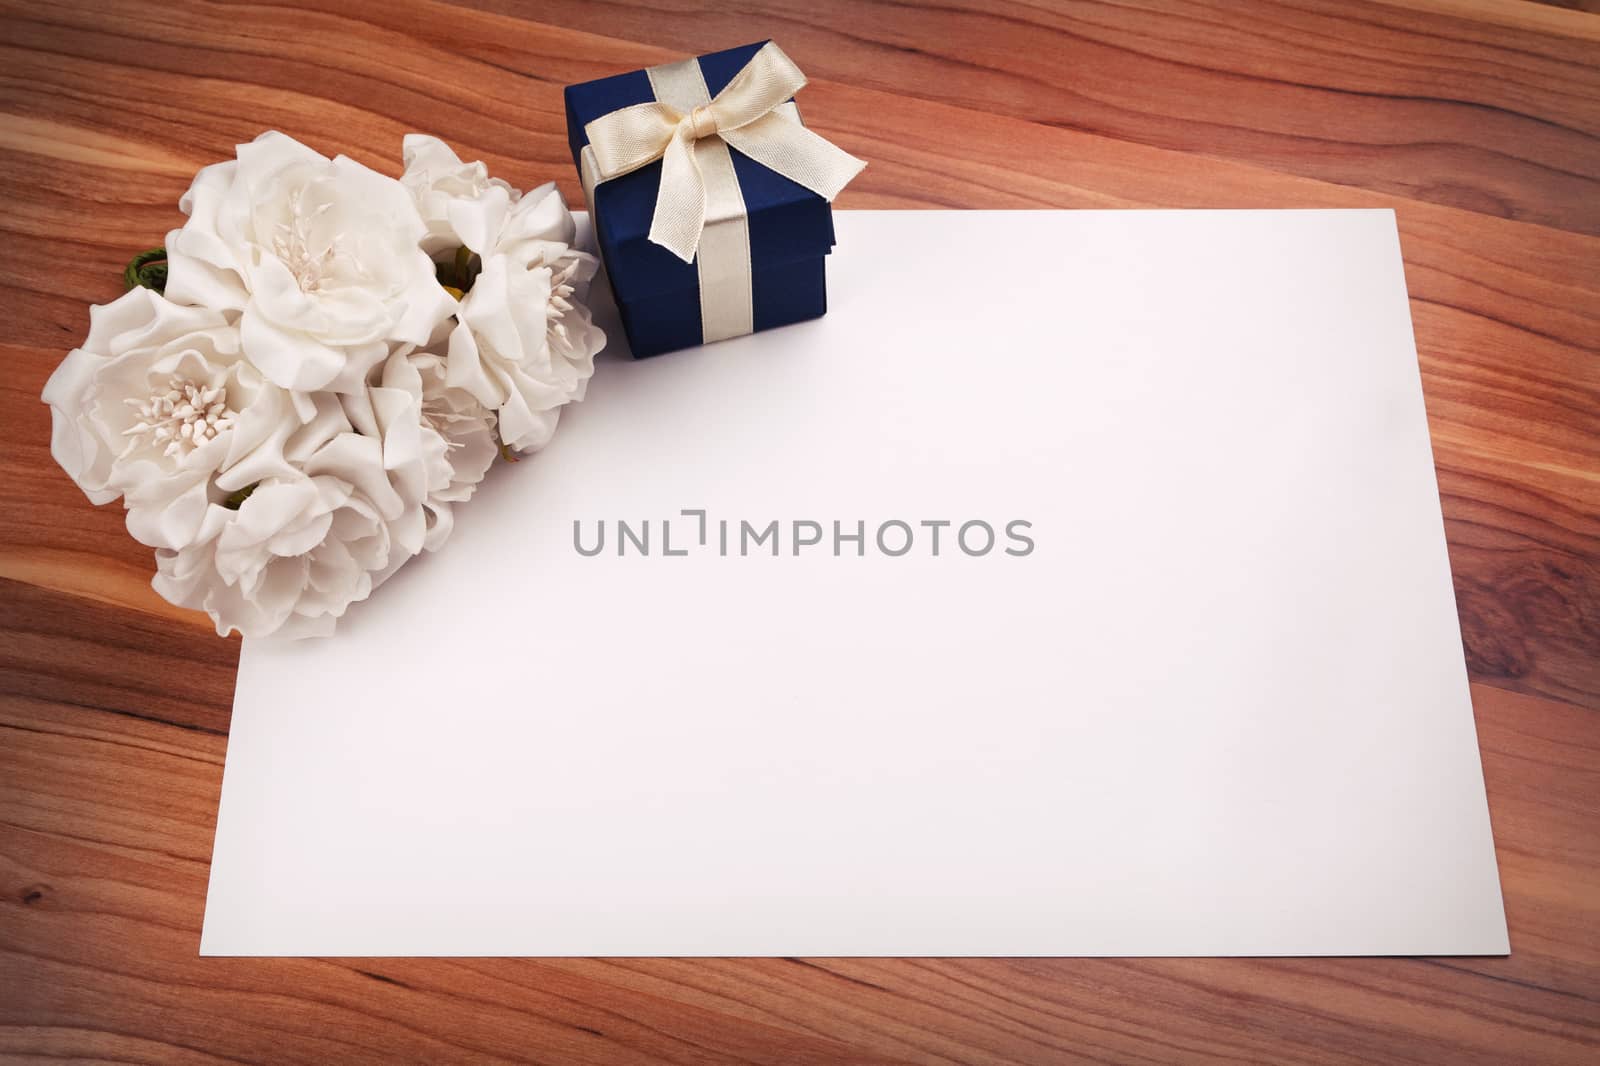 Greeting card with white flowers and a blue gift box